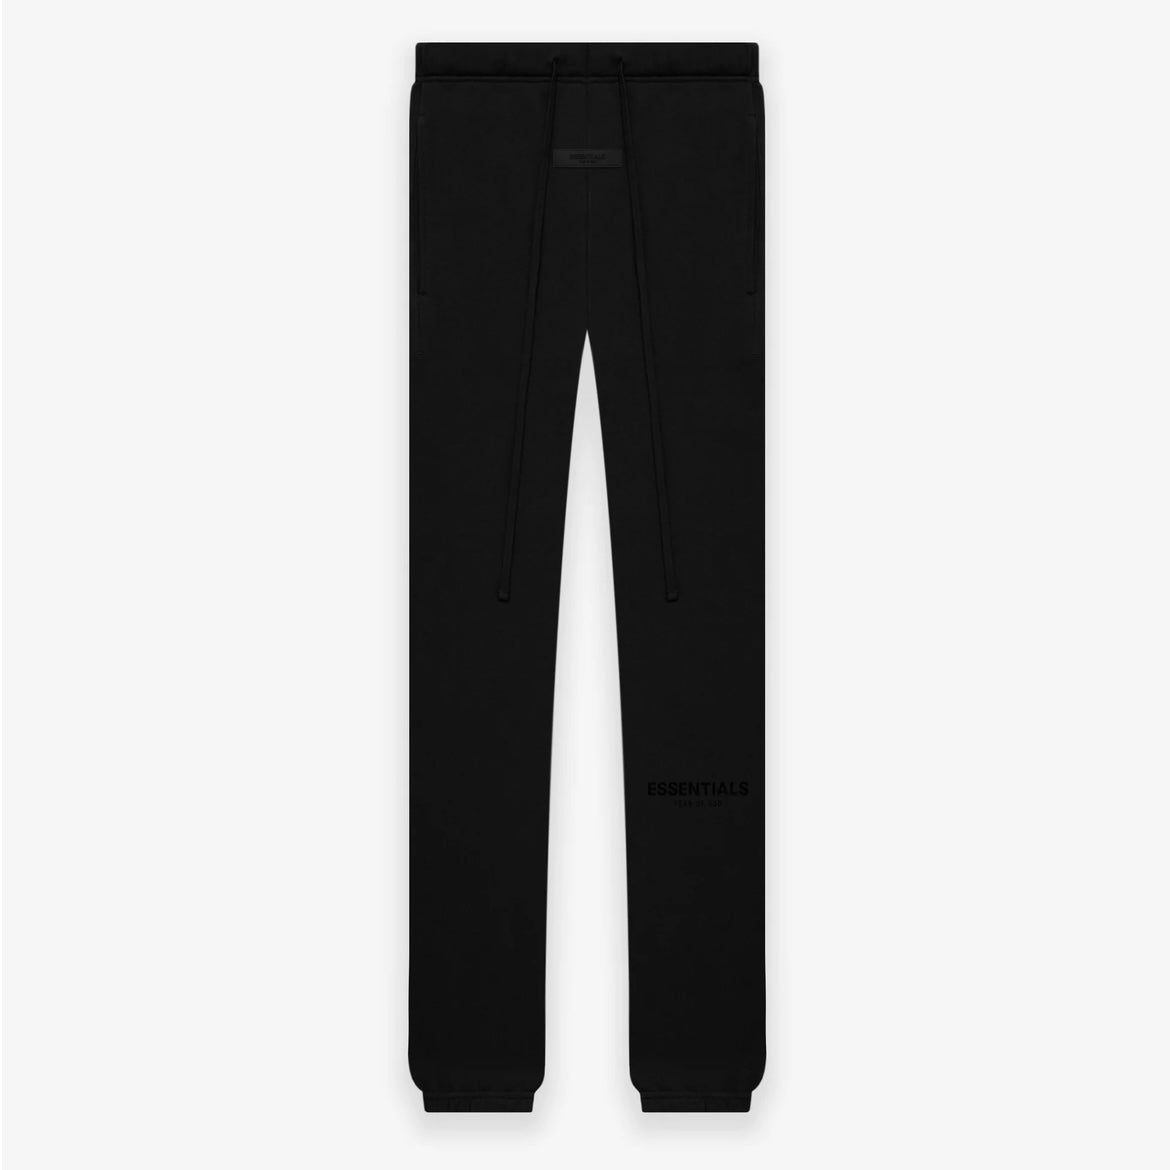 Fear of God Essentials Stretch Limo Sweatpants Front View